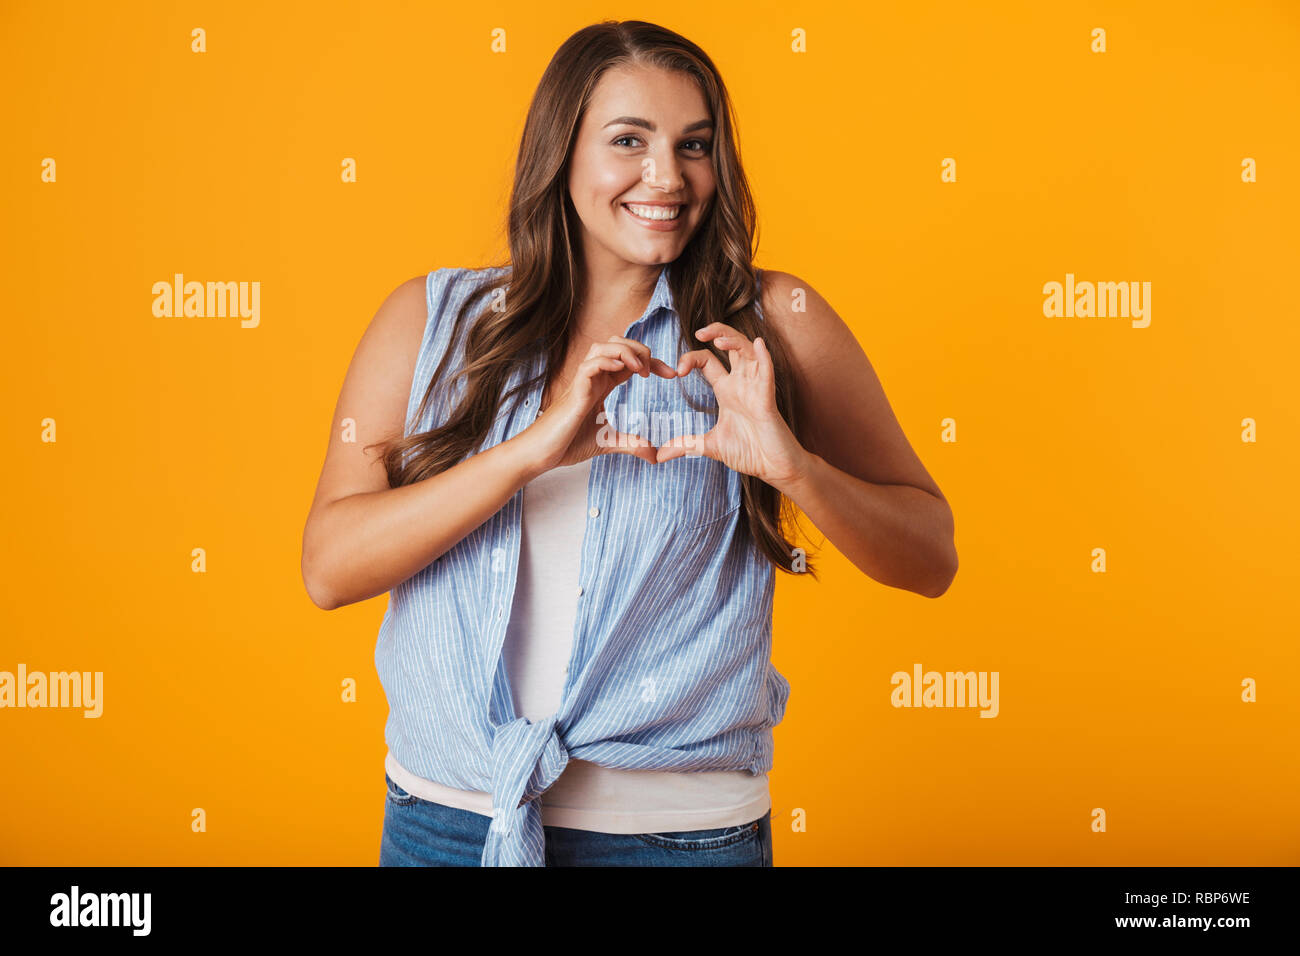 Smiling young overweight woman standing isolated over yellow background, showing heart gesture Stock Photo